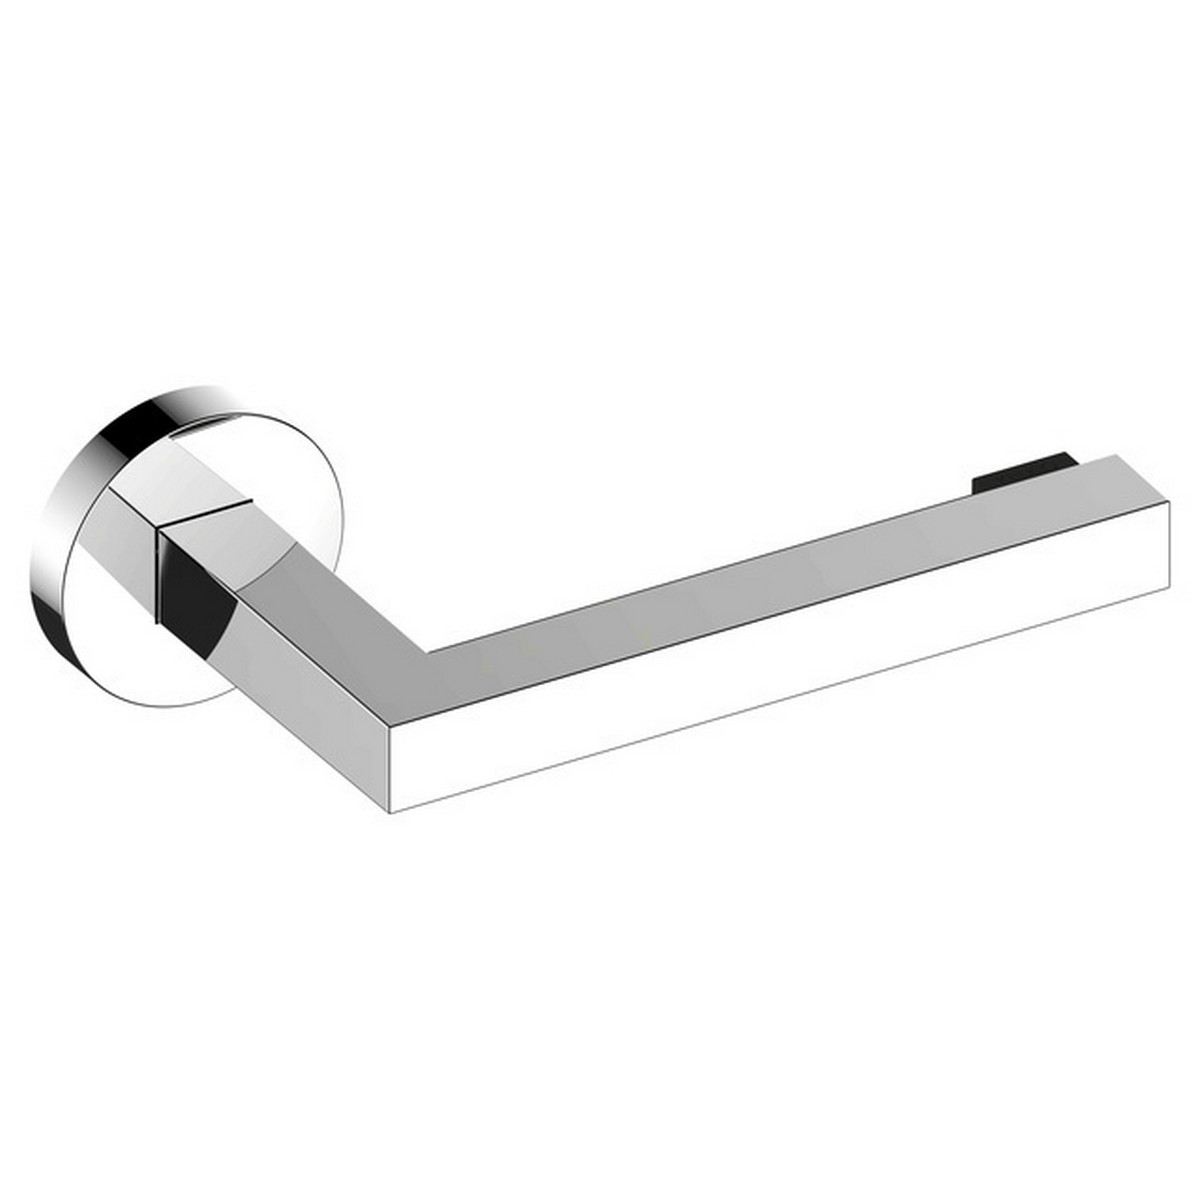 KEUCO 19062010000 EDITION 90 7 1/4 INCH WALL MOUNTED TOILET PAPER HOLDER IN POLISHED CHROME